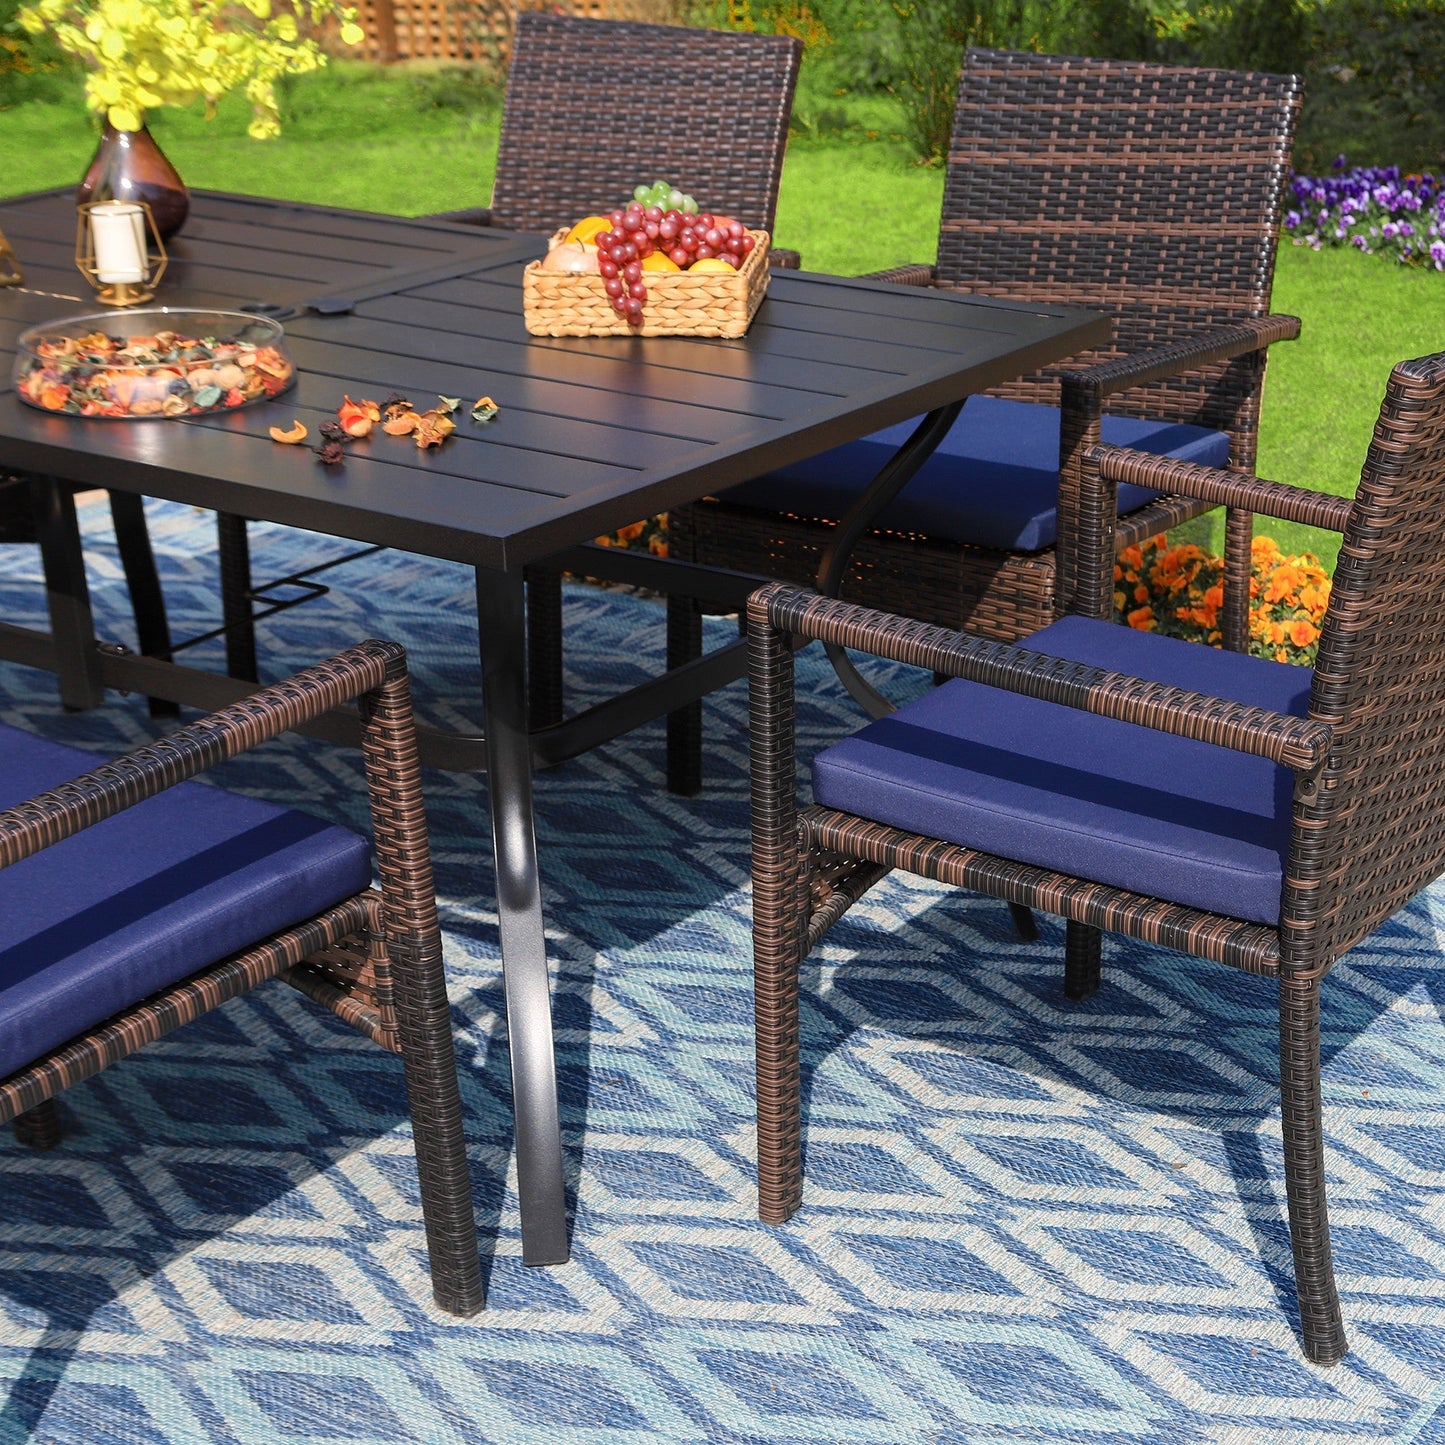 Sophia & William 8 Pieces Outdoor Patio Dining Set with 13 ft Navy Umbrella, Rattan Chairs & Metal Table for 6